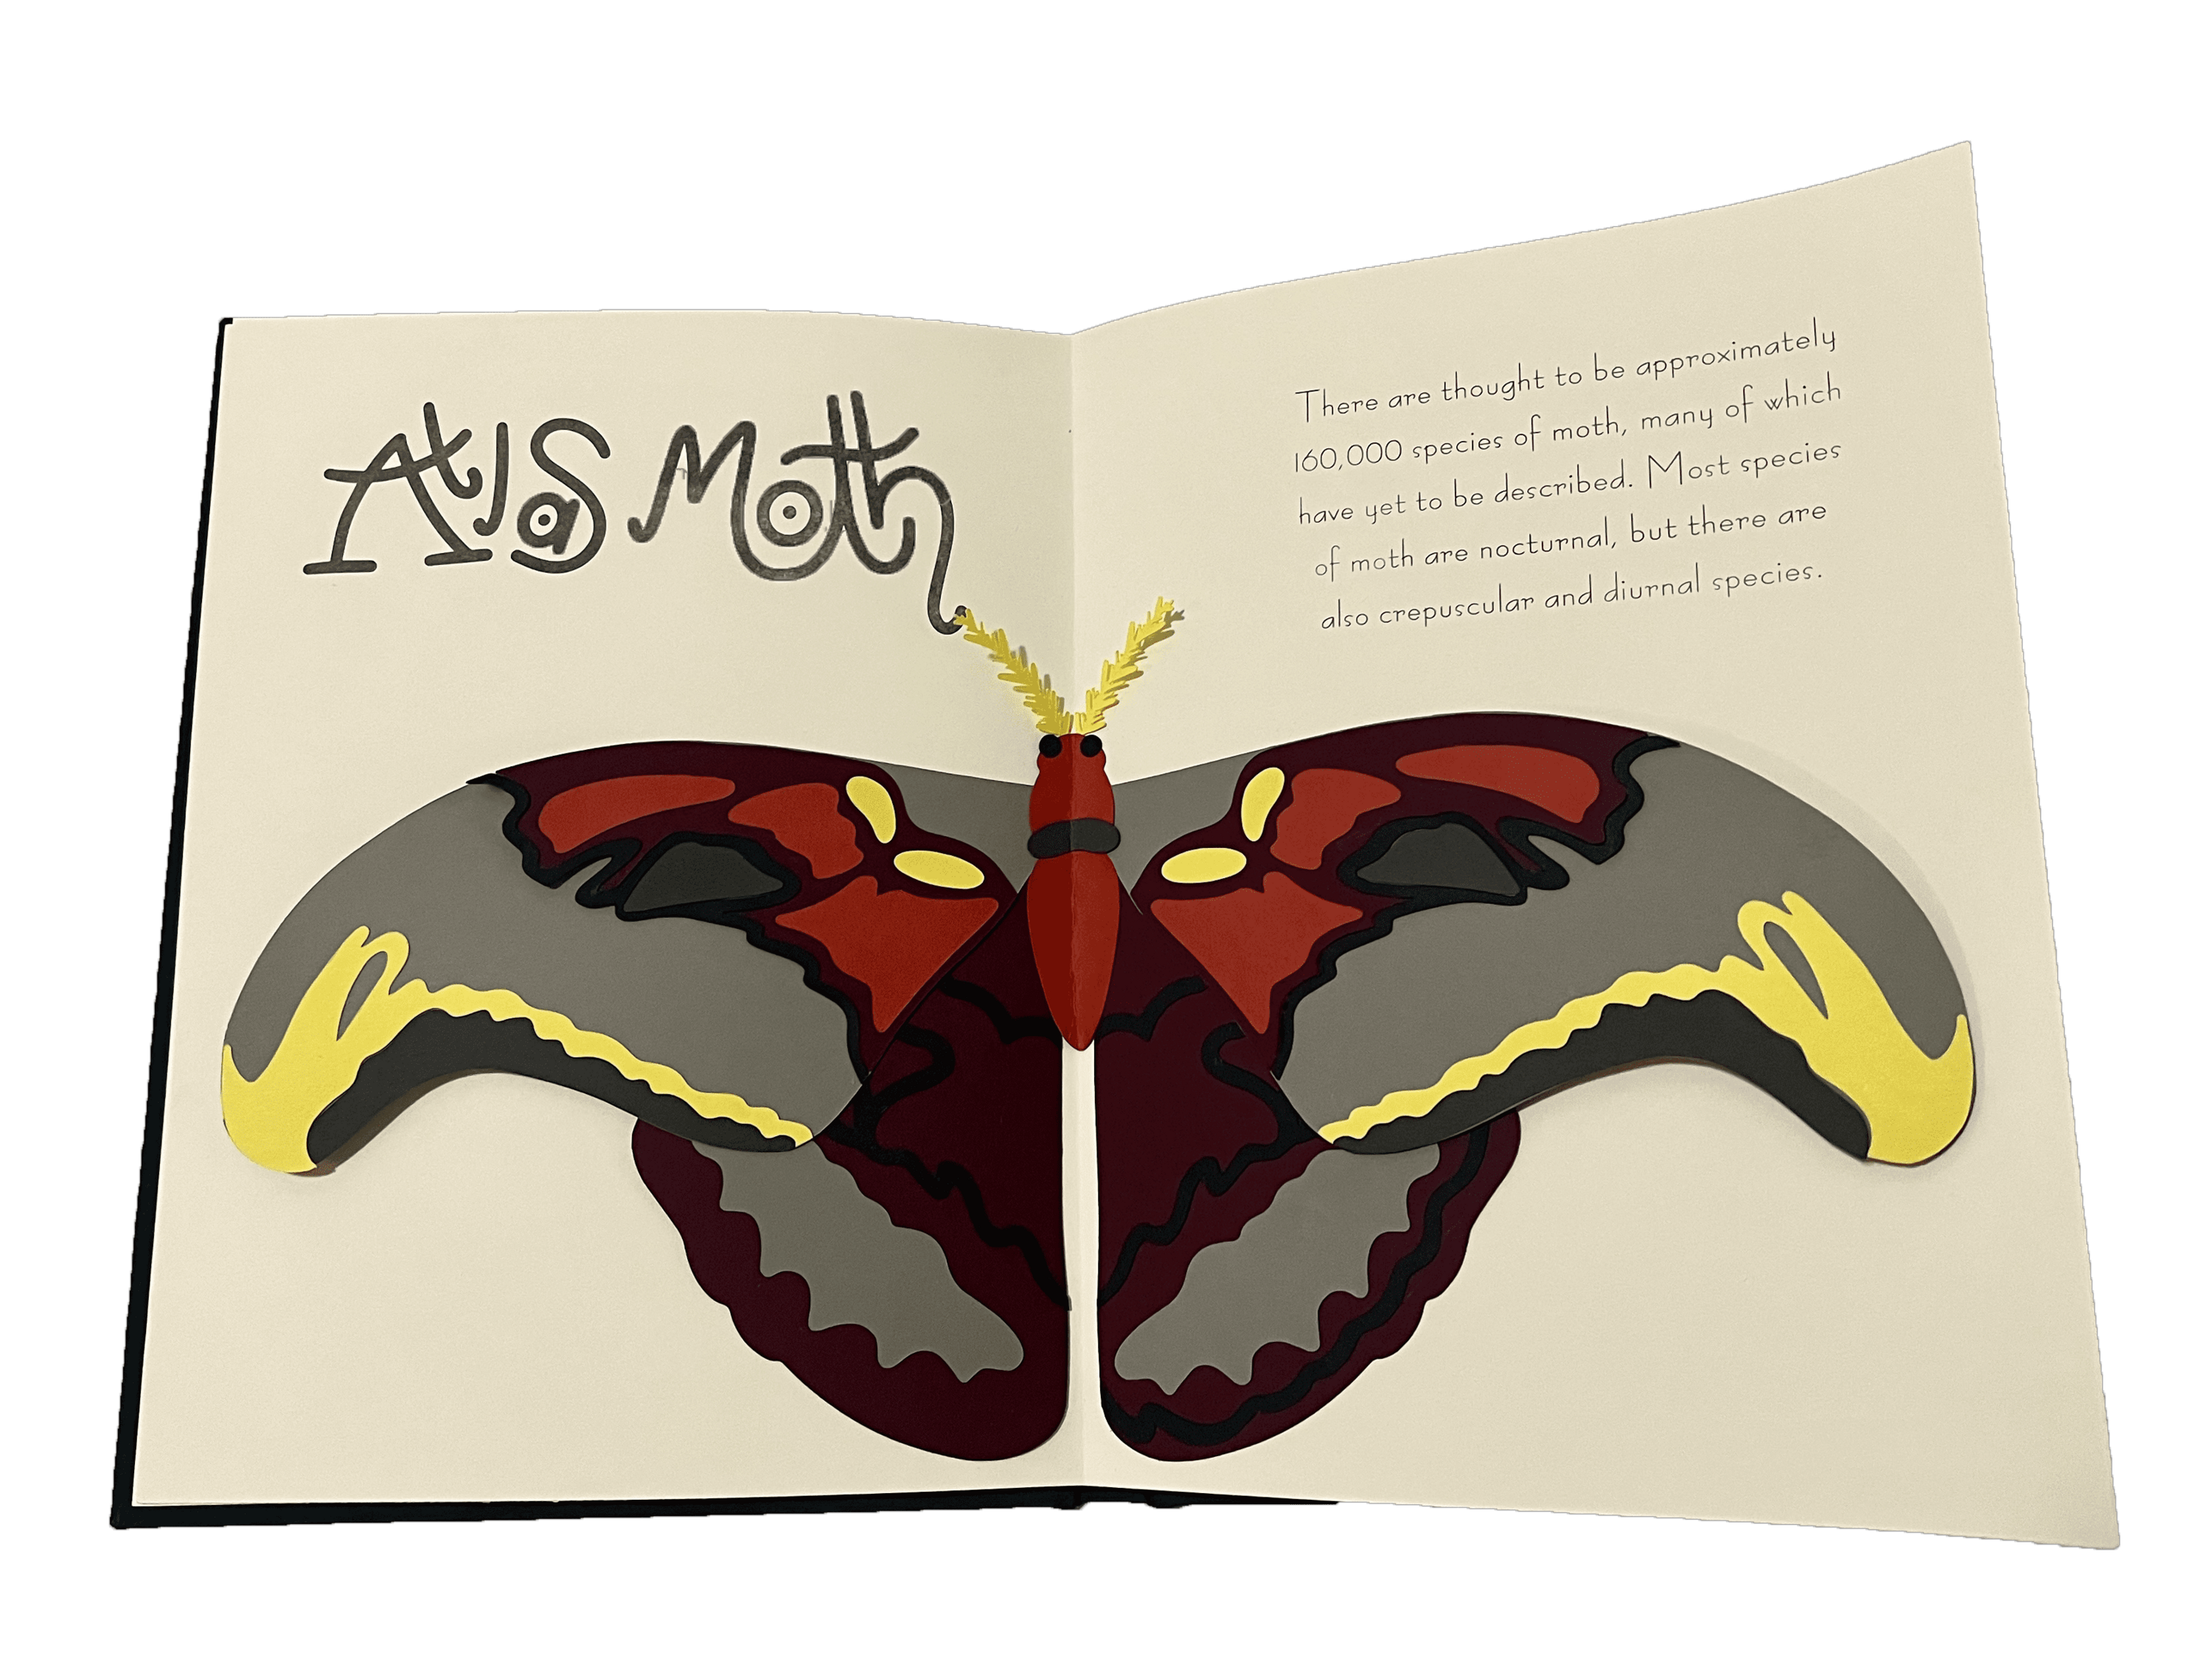 Pop-up illustration for the atlas moth, as part of "Bug-O-Pedia"